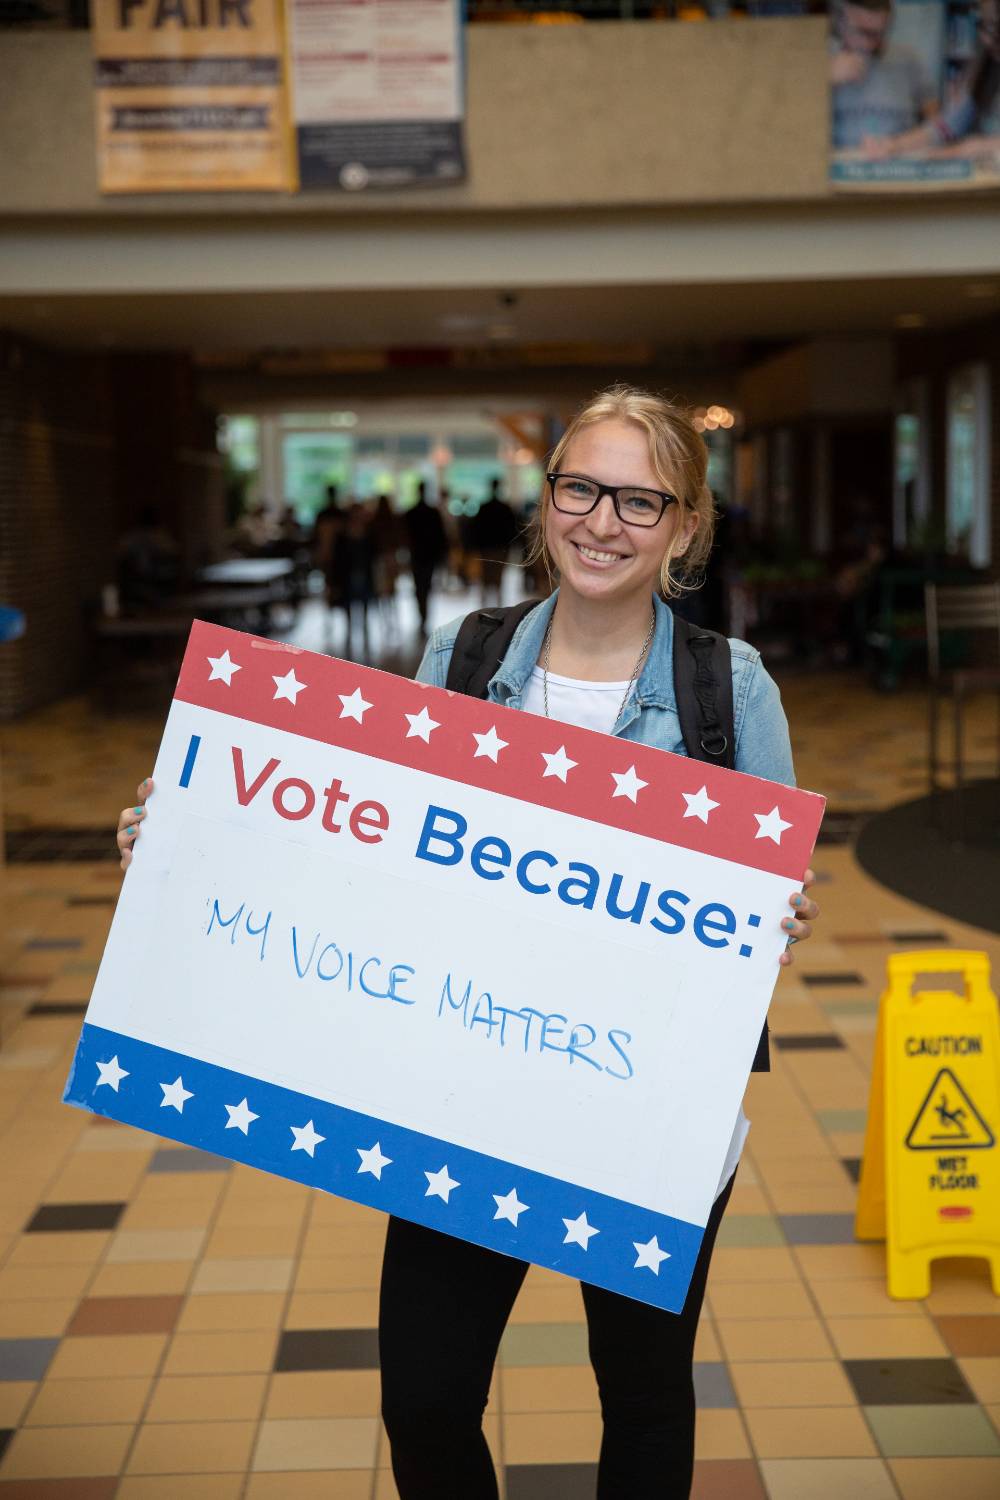 Student holding sign titled "I vote because: my voice matters"